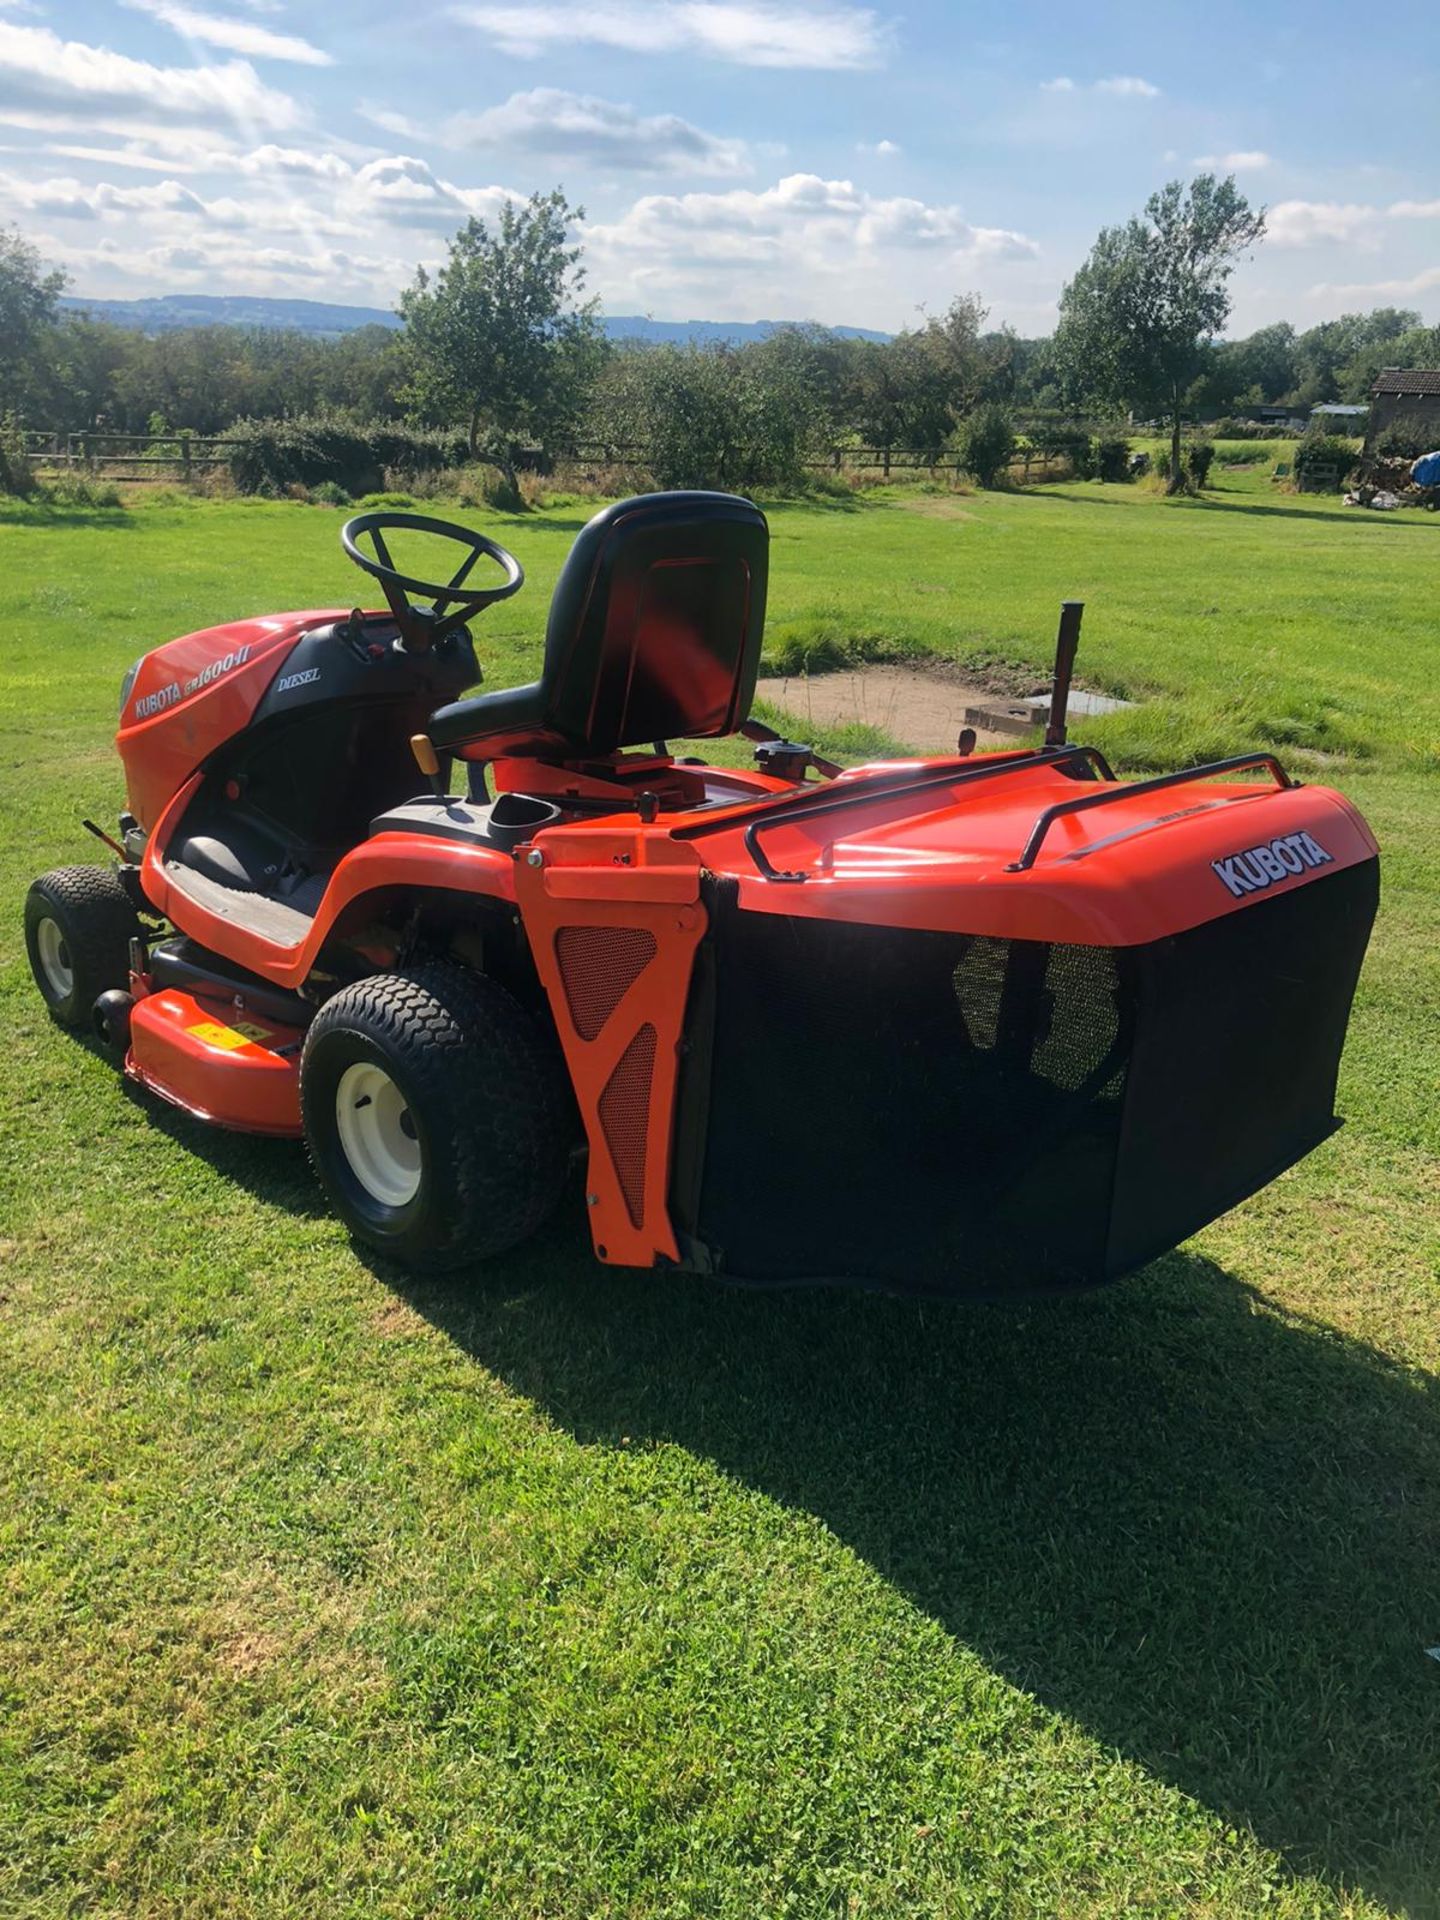 KUBOTA GR1600-II DIESEL RIDE ON LAWN MOWER, RUNS, DRIVES AND CUTS, EX DEMO CONDITION, ONLY 66 HOURS! - Image 3 of 4